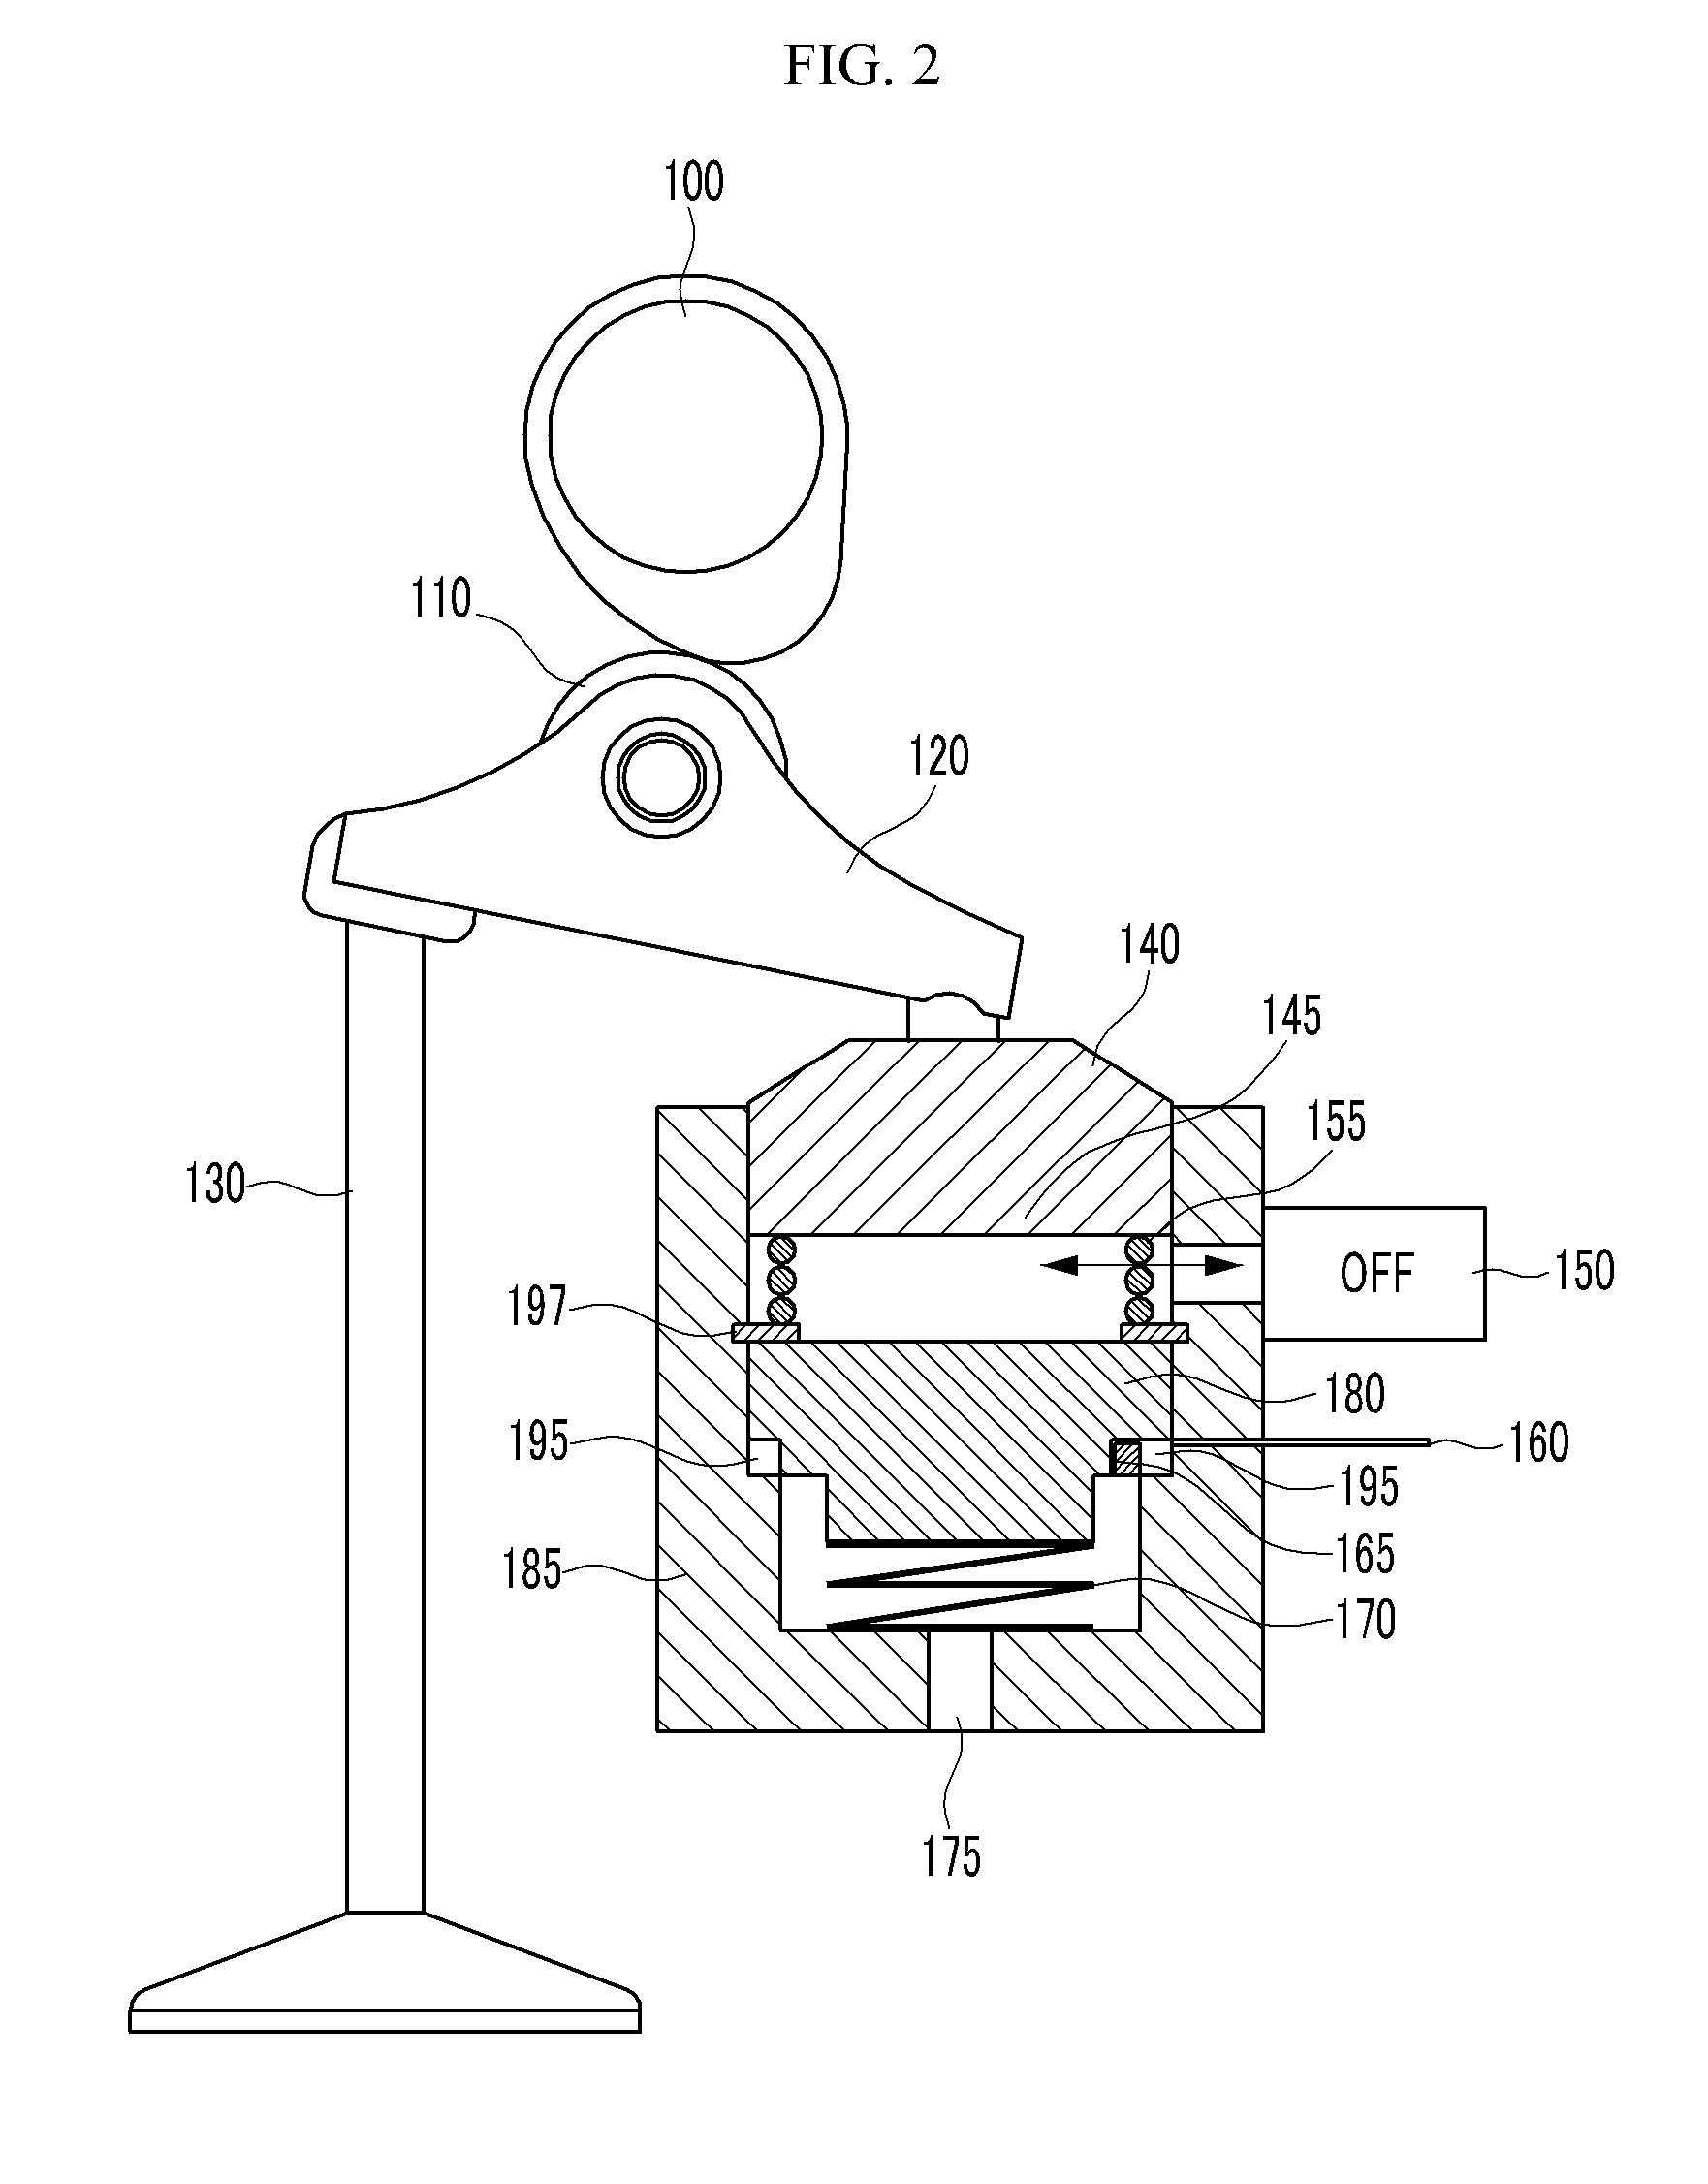 Engine equipped with variable valve device